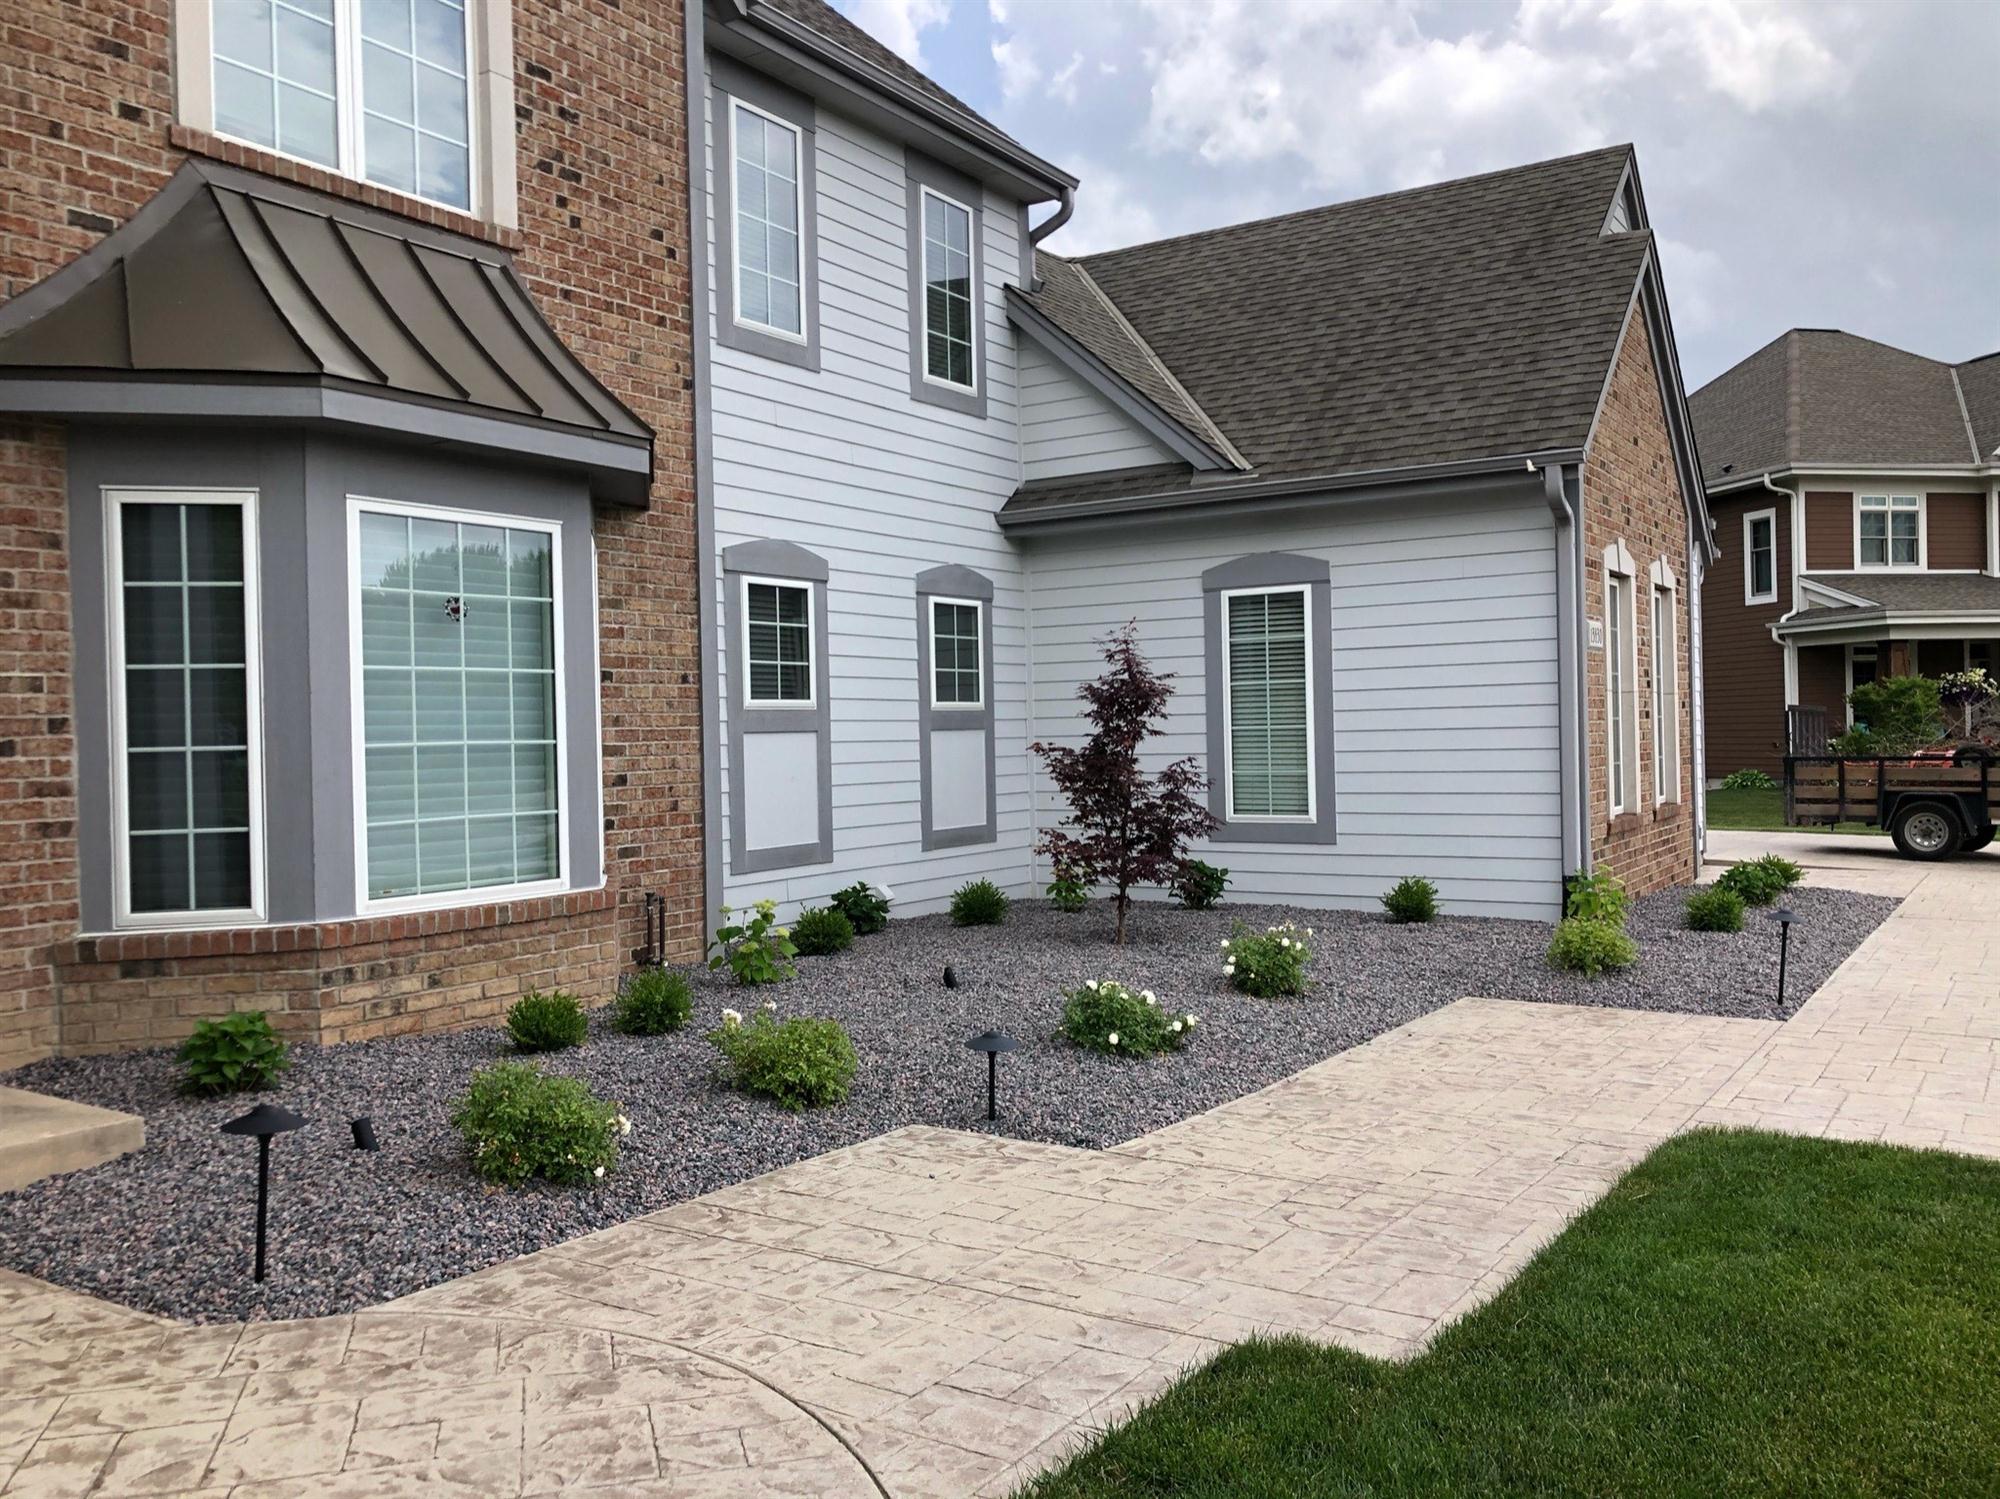 Pea gravel outdoor landscaping with plants in Wisconsin